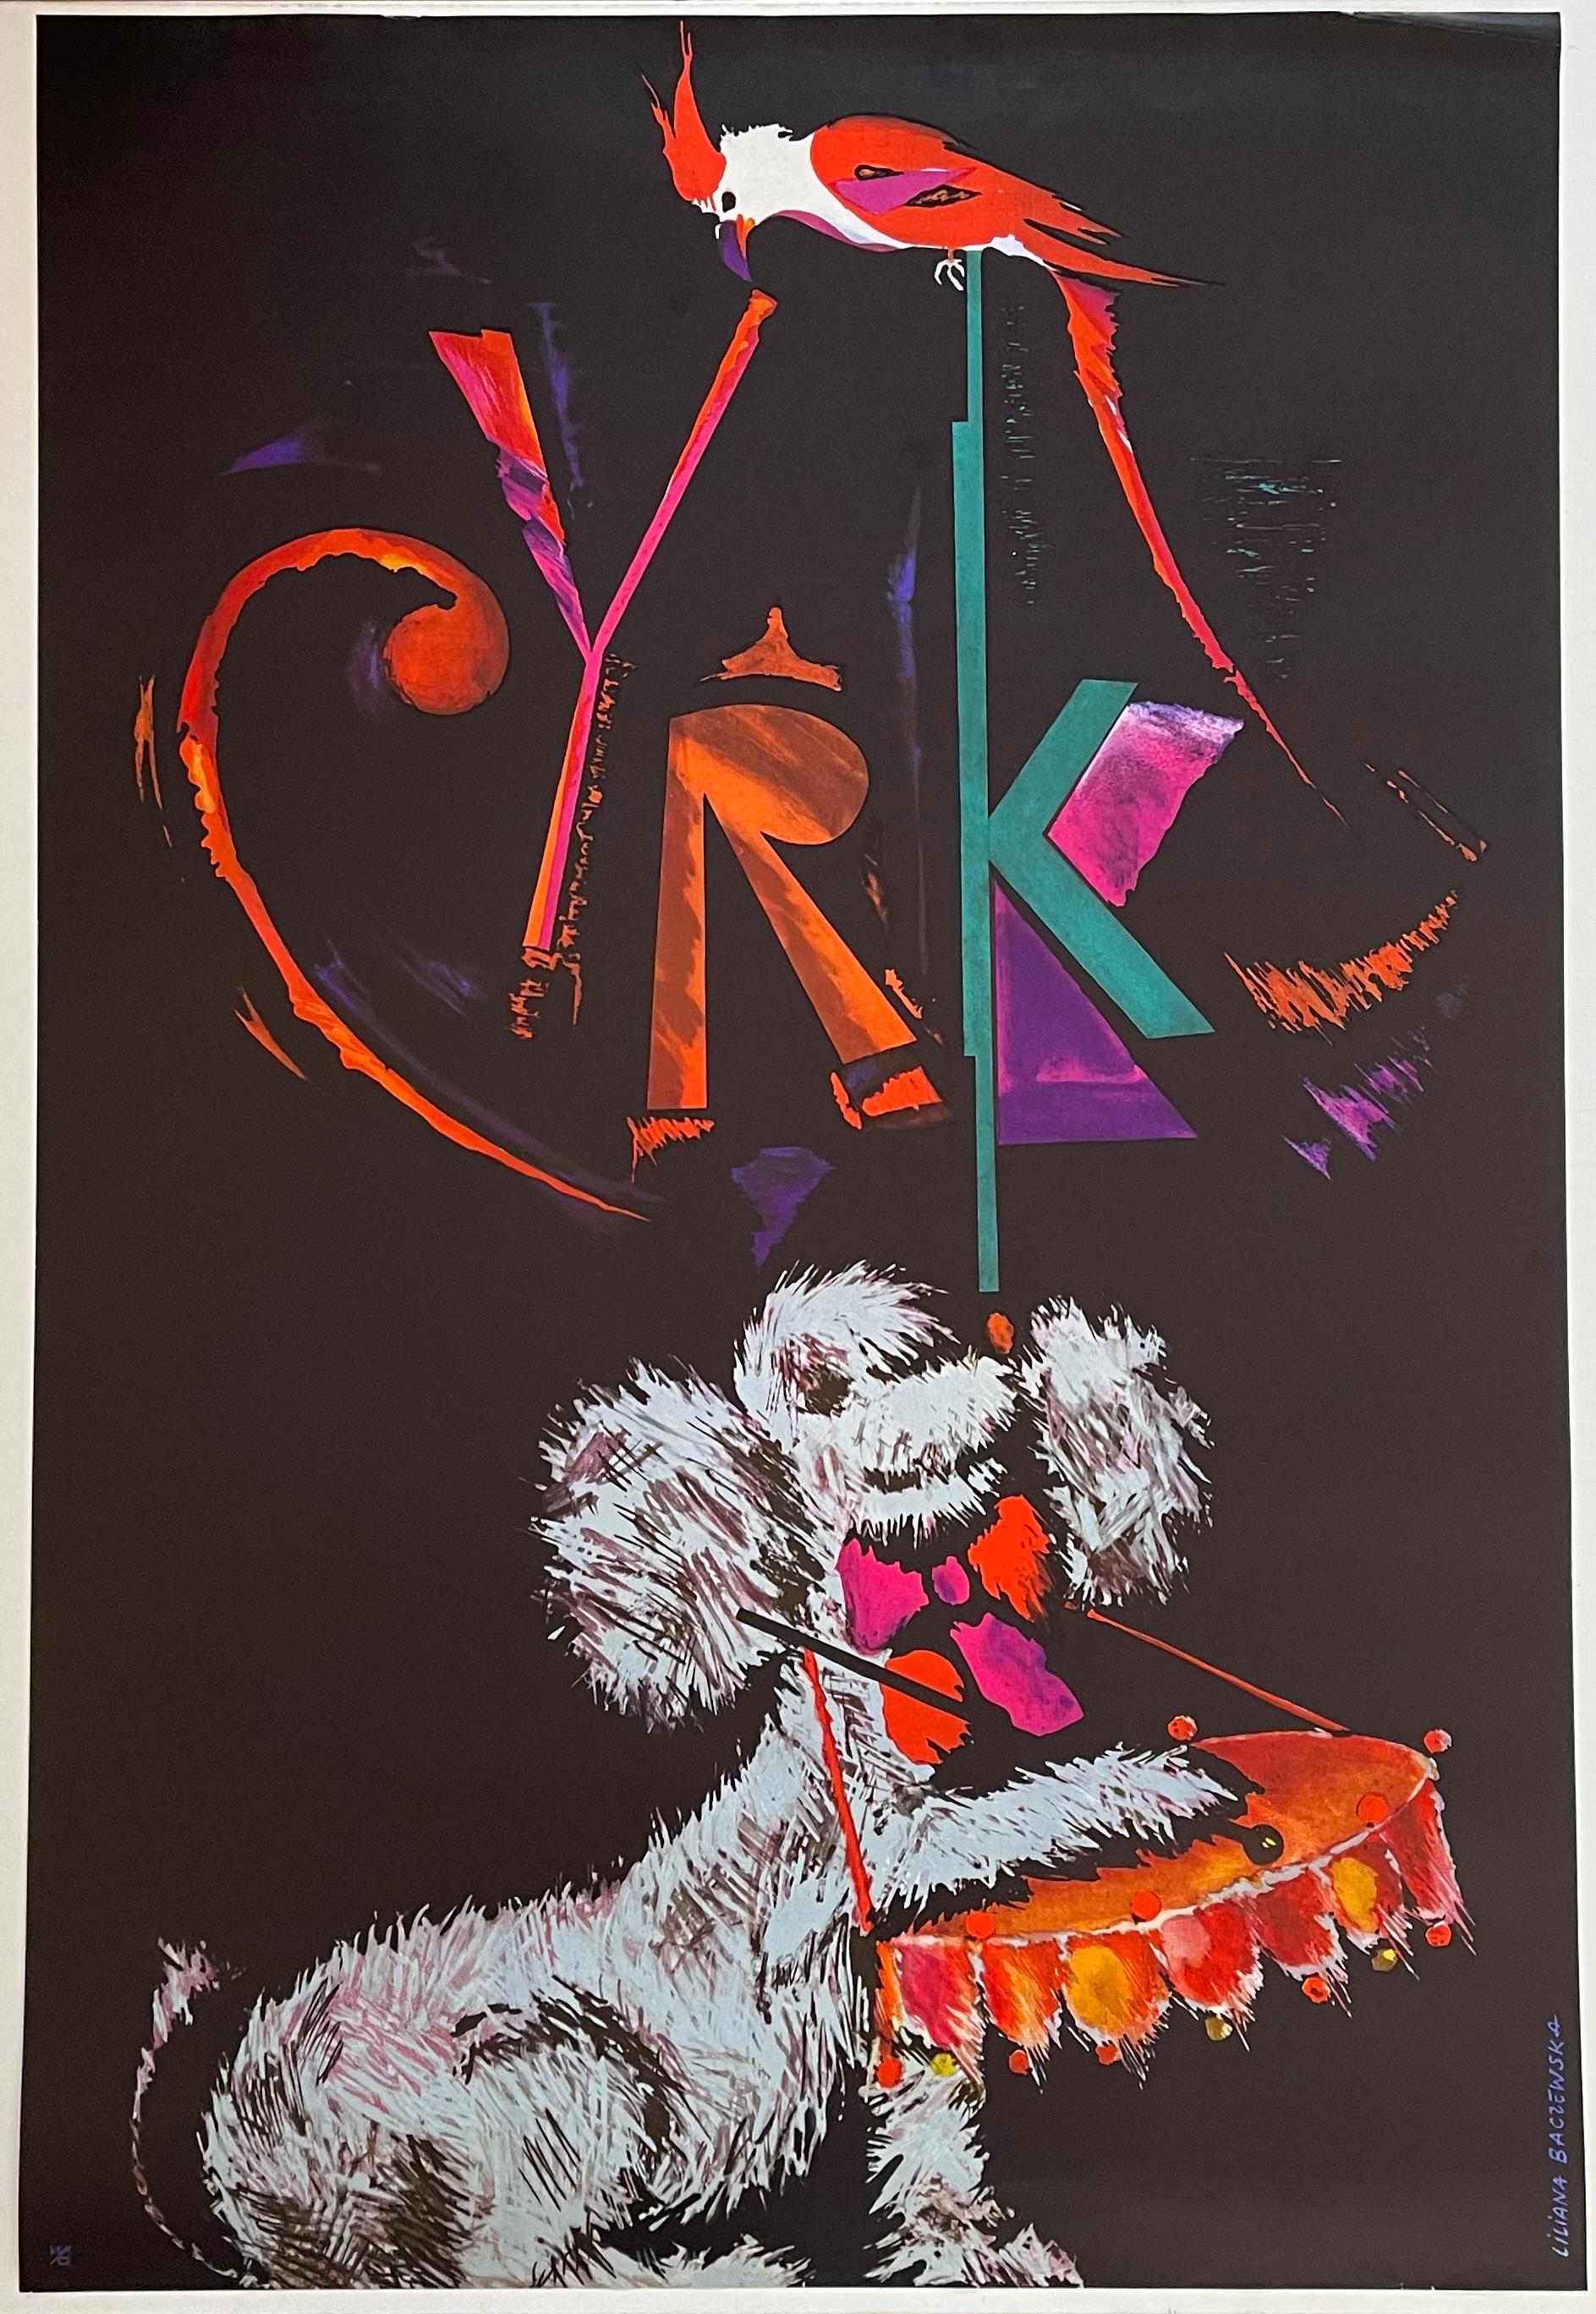 Circus Poodle Drummer, Vintage Polish Circus Poster by Liliana Baczewska, 1965 In Good Condition For Sale In London, GB